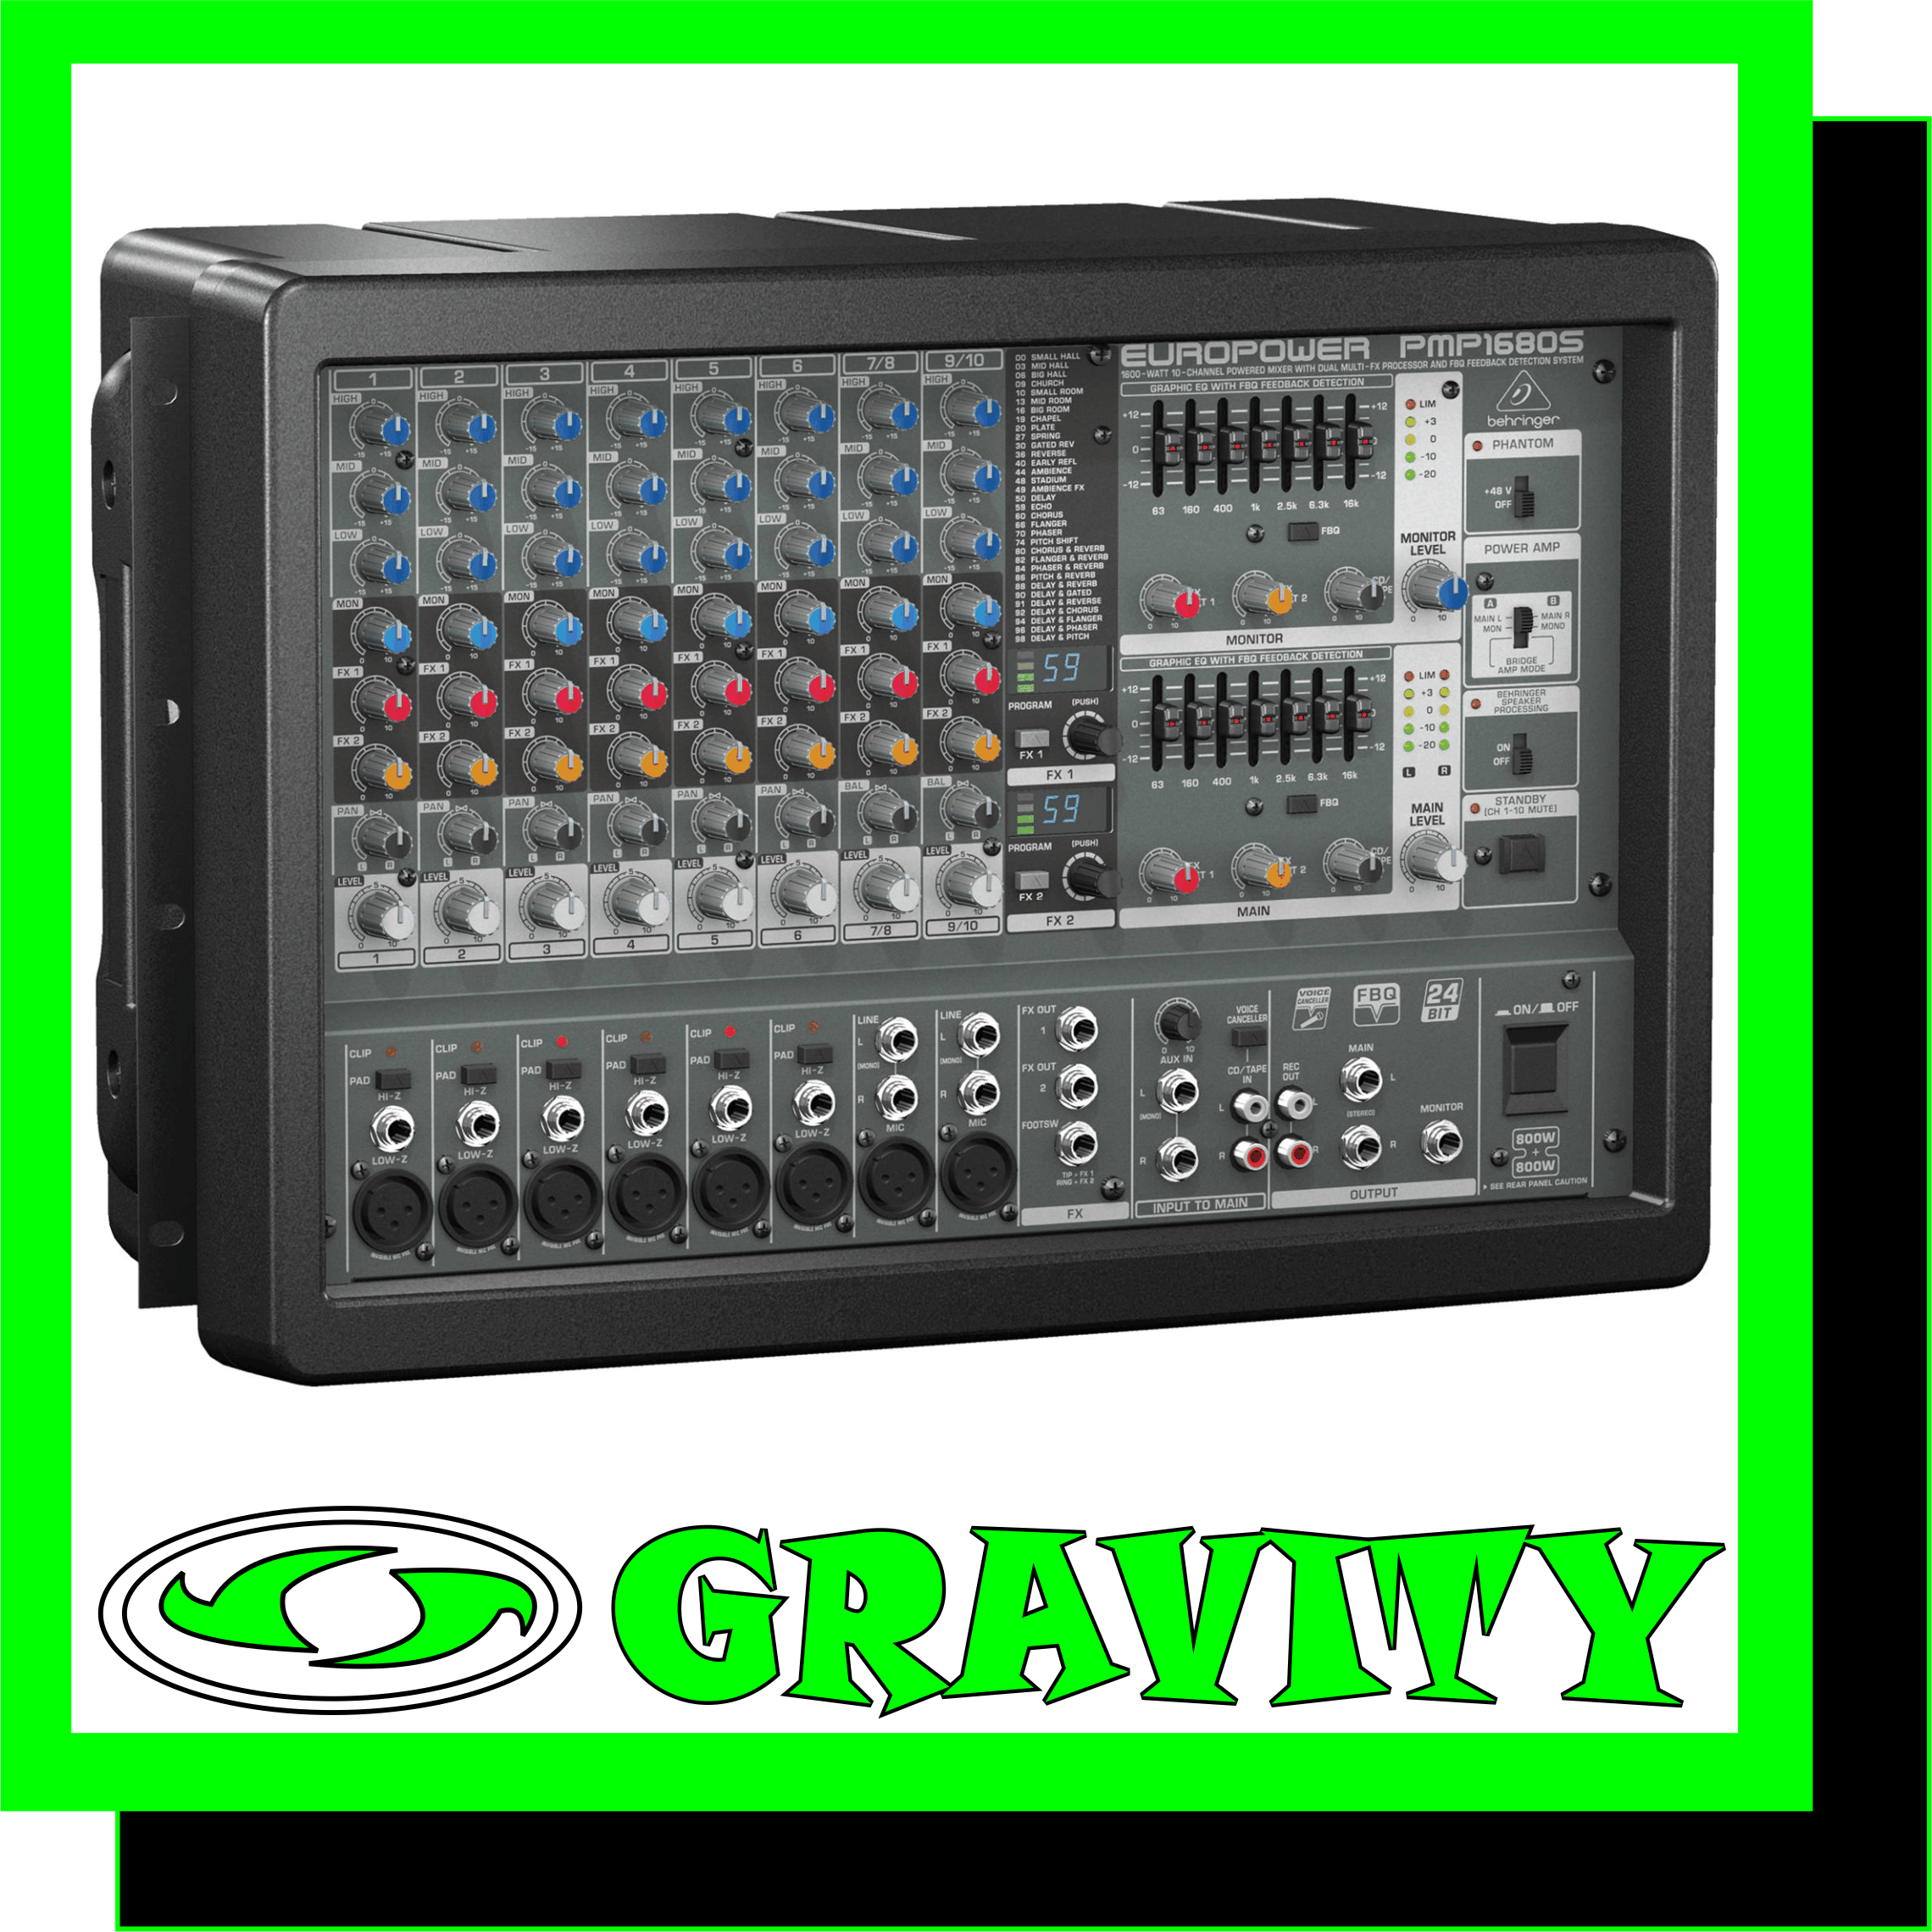 Behringer PMP1680S 1600-Watt 10-Channel Powered Mixer  FEATURES -Ultra-compact rackmountable 2 x 800-Watt stereo powered mixer (1600-Watt bridged mode) -Revolutionary Class-D amplifier technology: enormous power, incredible sonic performance and super-lightweight -Ultra-compact design at nearly half the depth and weight of conventional powered mixers means no more lugging around dead weight -10-channel mixer section features 6 mono and 2 stereo channels plus separate CD/Tape input/output -2 studio-grade, 24-bit stereo FX processors with 100 awesome presets including reverb, chorus, flanger, delay, pitch shifter, and various multi-effects -Revolutionary FBQ Feedback Detection system instantly reveals critical frequencies for easy feedback removal -8 high-quality mic preamps with switchable +48 V phantom power for condenser microphones -Effective, extremely musical 3-band EQ, switchable Pad, and Clip LEDs on all mono channels -Stereo 7-band graphic EQ allows precise frequency correction of monitor and main outputs -Voice Canceller function removes singer's voice from recordings for karaoke applications -Selectable stereo (main L/R), double mono (main/monitor) or bridged mono amplifier operation mode -Speaker Processing function adjusts frequency response to match professional speaker systems like BEHRINGER EUROLIVE series, etc. -Standby switch mutes all input channels during breaks while background music is provided via CD/Tape input -Adjustable stereo Aux input for connecting external signal sources -Internal switch-mode power supply, noise-free audio, superior transient response and very low power consumption -Rack mount brackets included -High-quality components and exceptionally rugged construction ensure long life -Conceived and designed by BEHRINGER Germany  EUROPOWER PMP1680S  The amazing PMP1680S Powered Mixer packs tremendous power (2 x 800 Watts stereo or 1,600 Watts in Bridged mode), while maintaining an incredible power-to-weight ratio. These mixers employ high-efficiency Class-D technology and a state-of-the- art switch-mode power supply, which significantly reduces weight and heat. The 10-channel PMP1680S features 8 high-quality mic preamps, 2 stereo channels, dual 24-bit Multi-FX processors with 100 awesome presets including studio-class reverbs, delays, pitch shifter and various multi-effects, plus a 7-band stereo graphic EQ with our proprietary FBQ Feedback Detection System – for the ultimate in feedback-free performance.